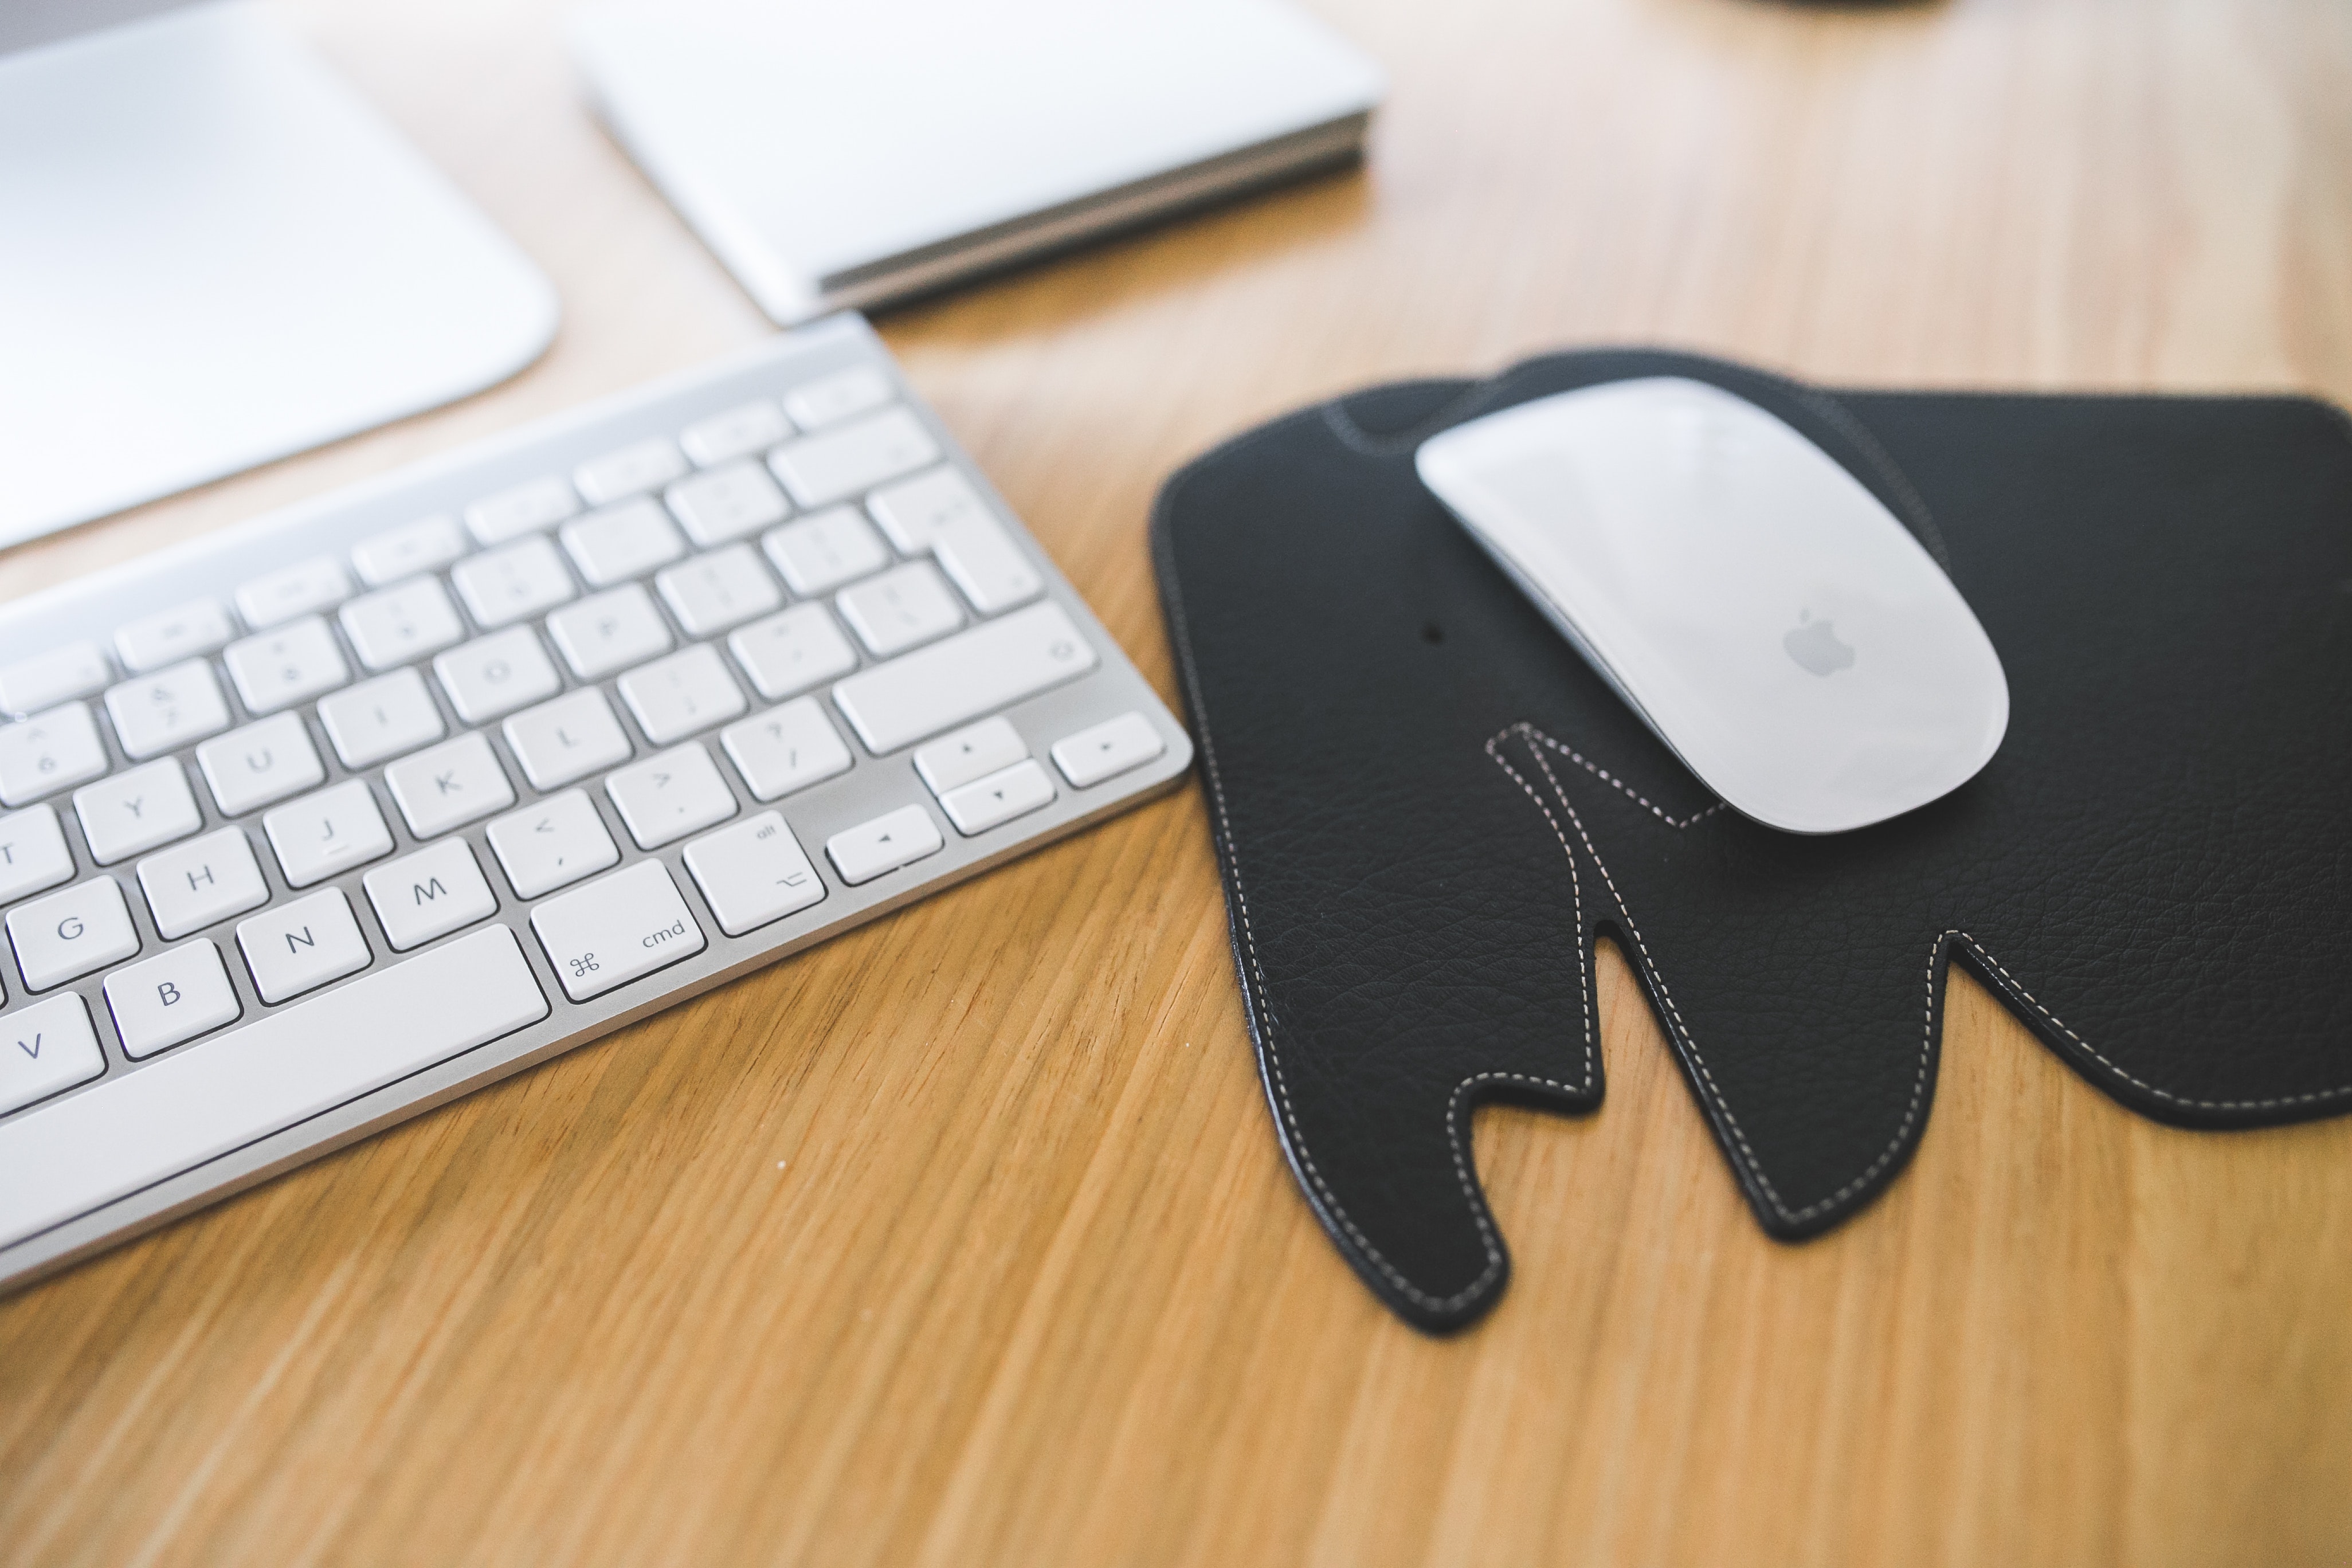 White Apple mouse and keyboard on the black Elephant Pad, Apple, Design, Desk, Keyboard, HQ Photo